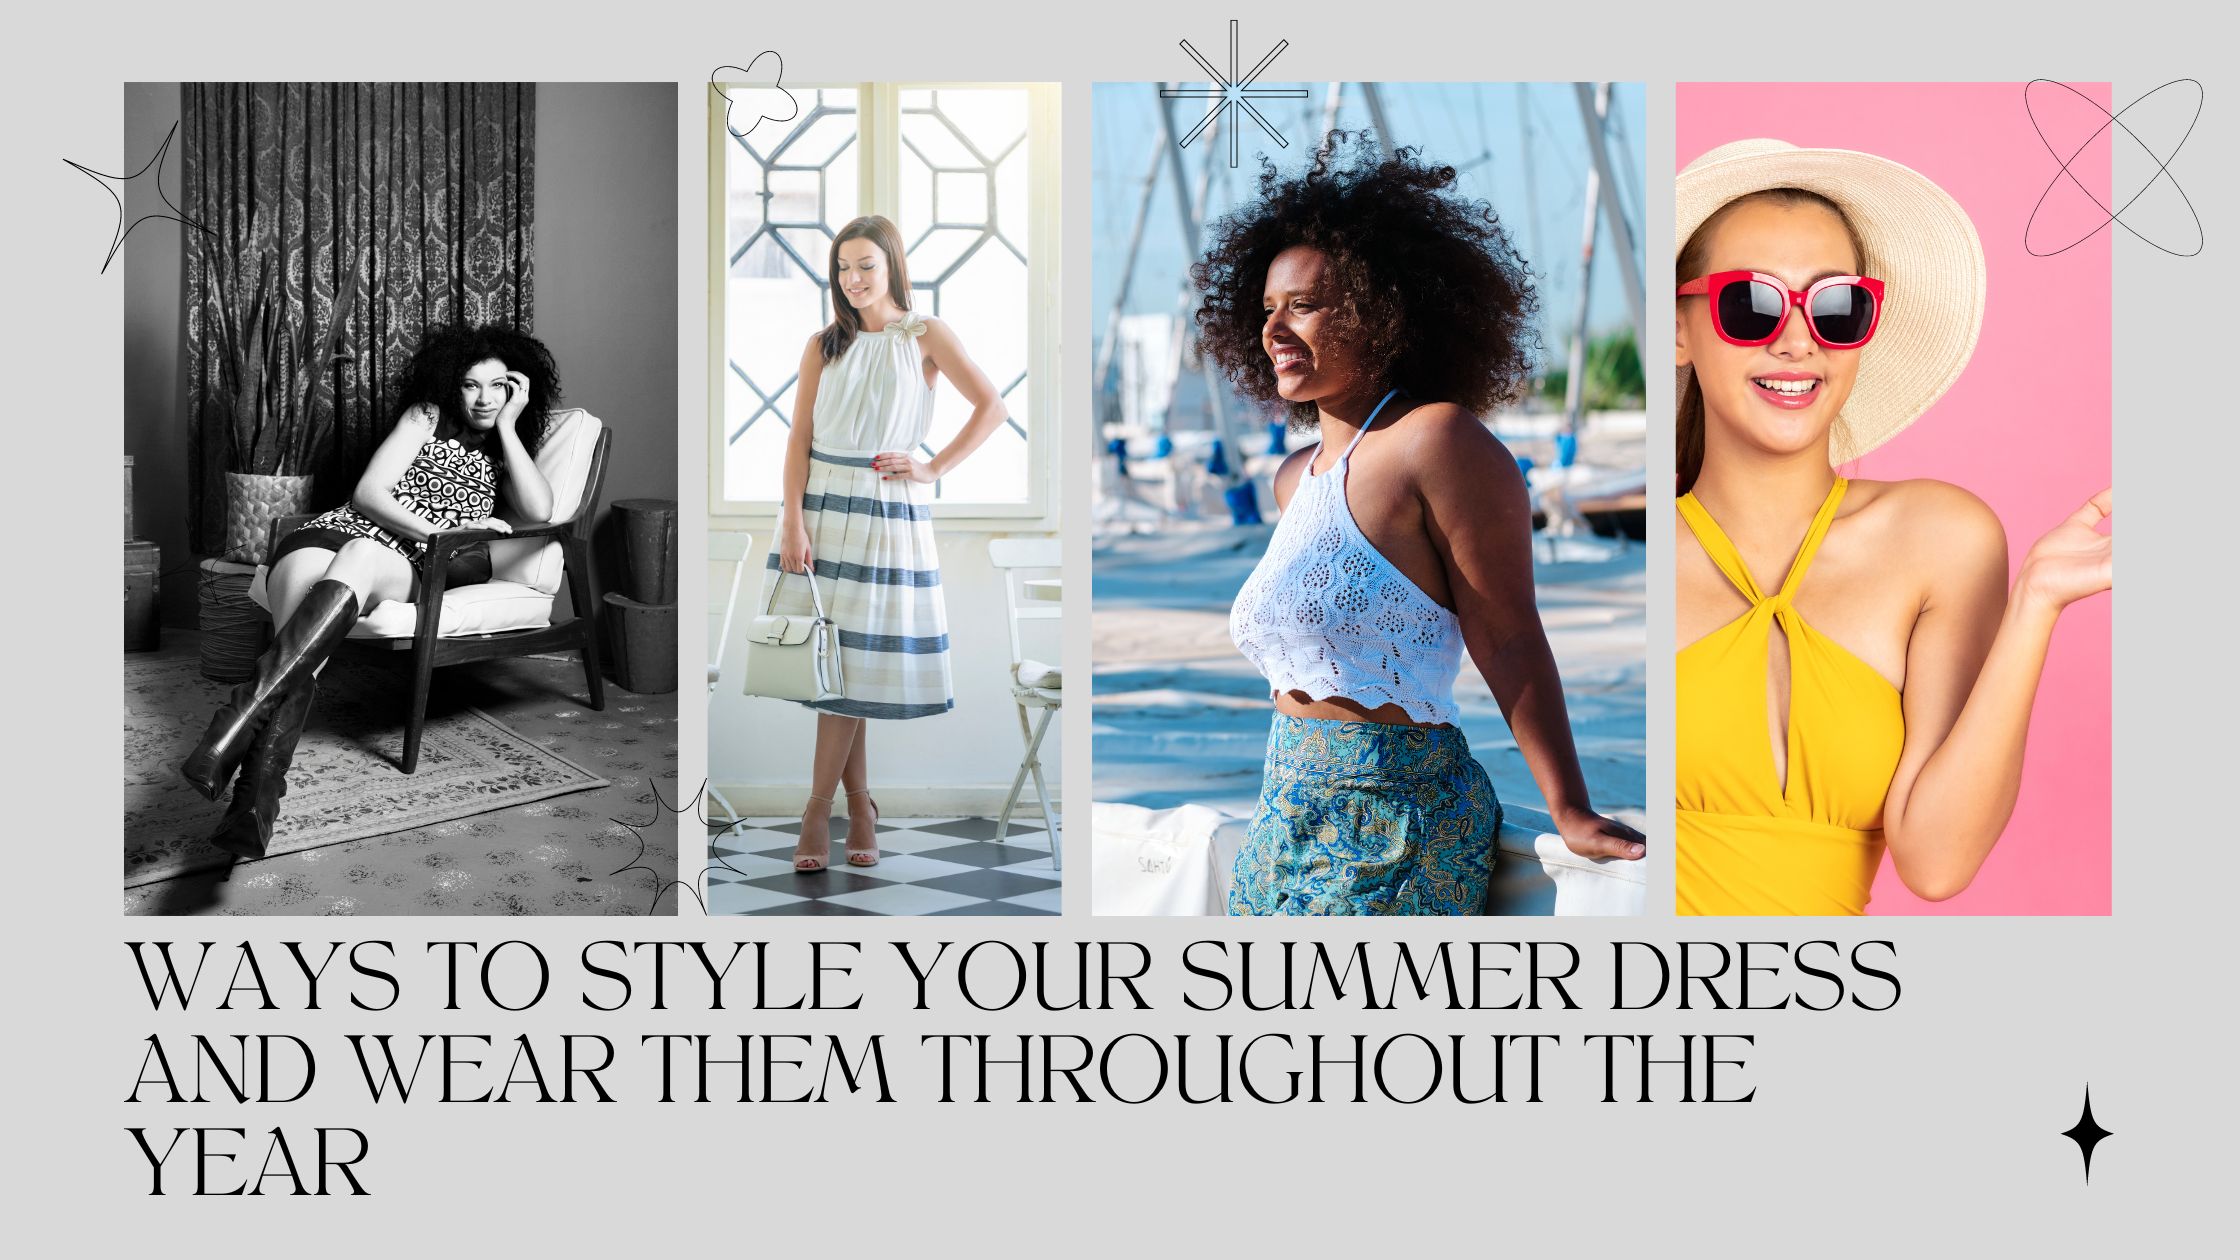 Ways to style your summer dress and wear them throughout the year